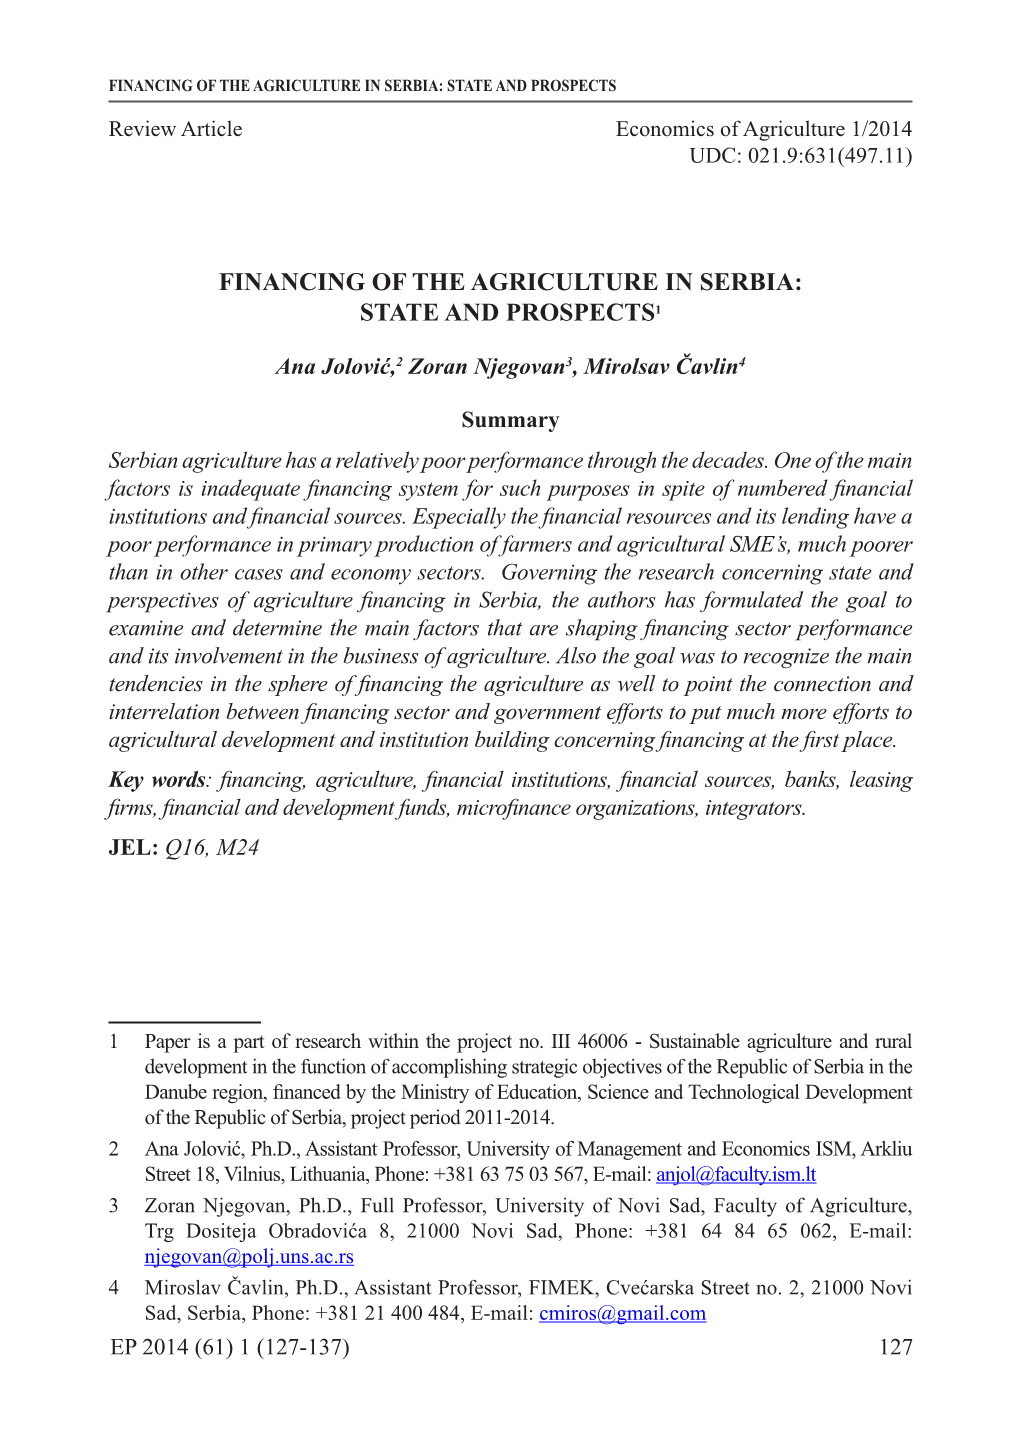 Financing of the Agriculture in Serbia: State and Prospects